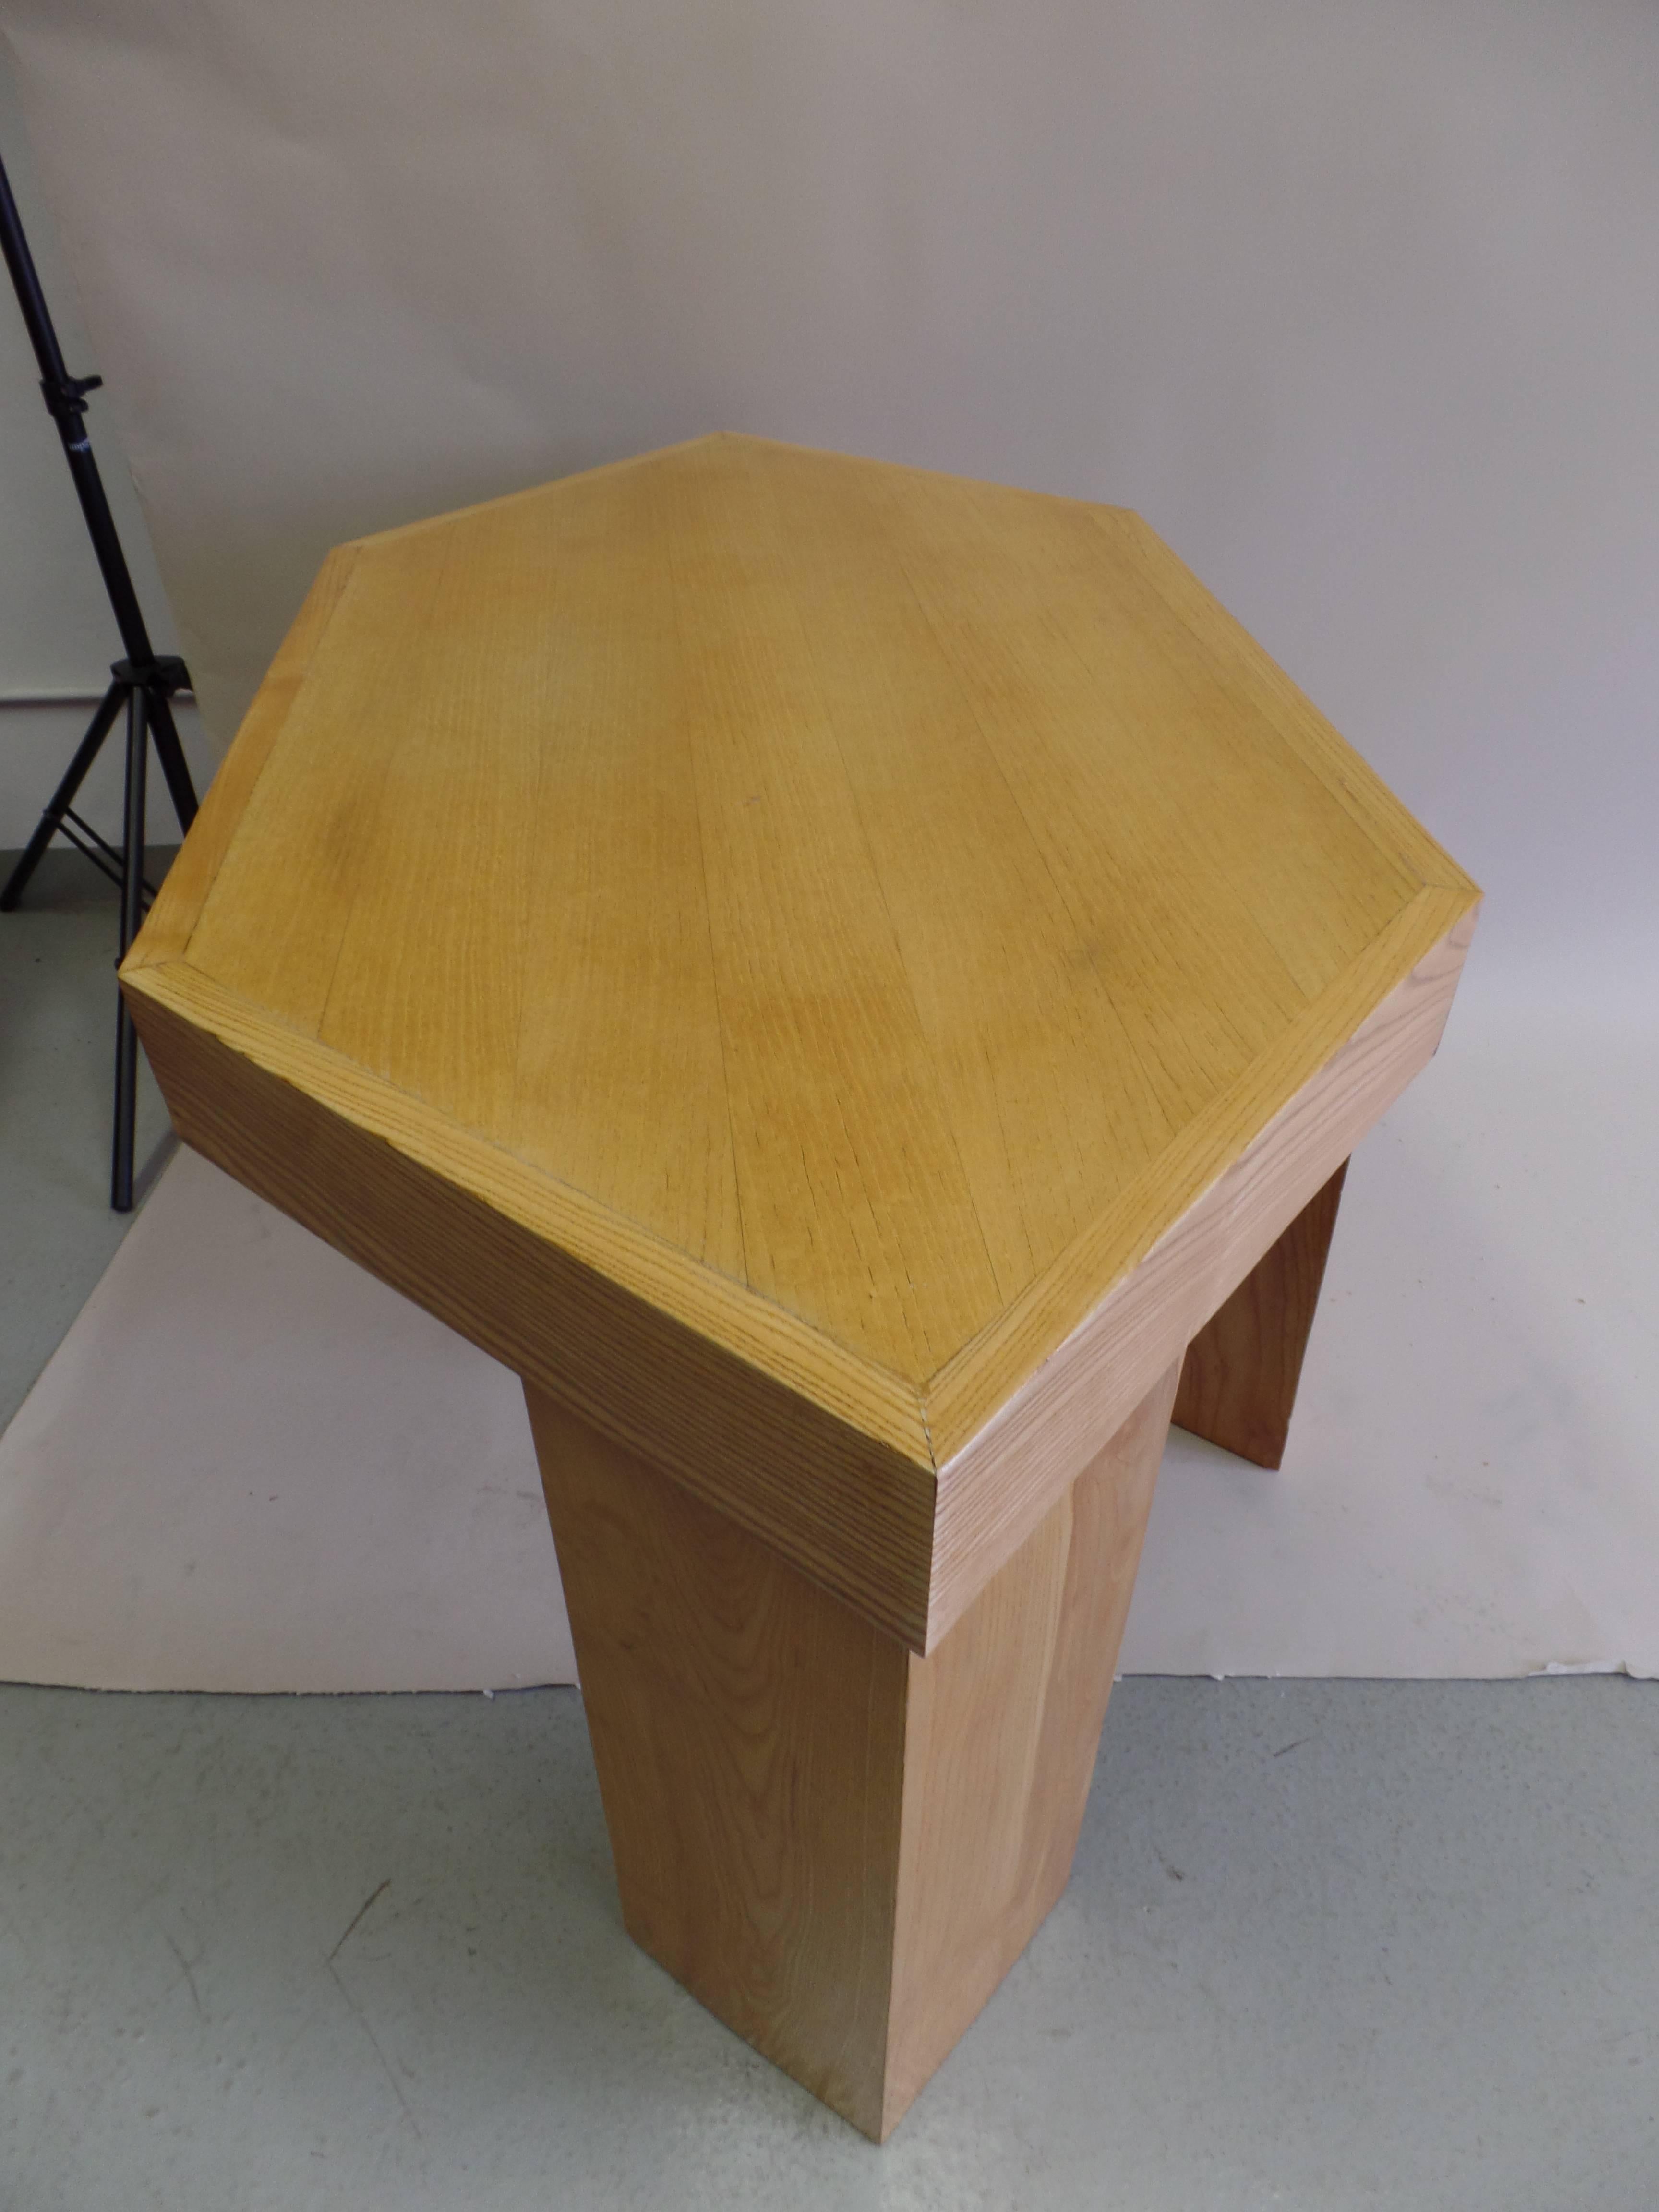  French Futurist / Mid-Century Modern Trapezoid Desk by Alain Marcoz, circa 1956 For Sale 2